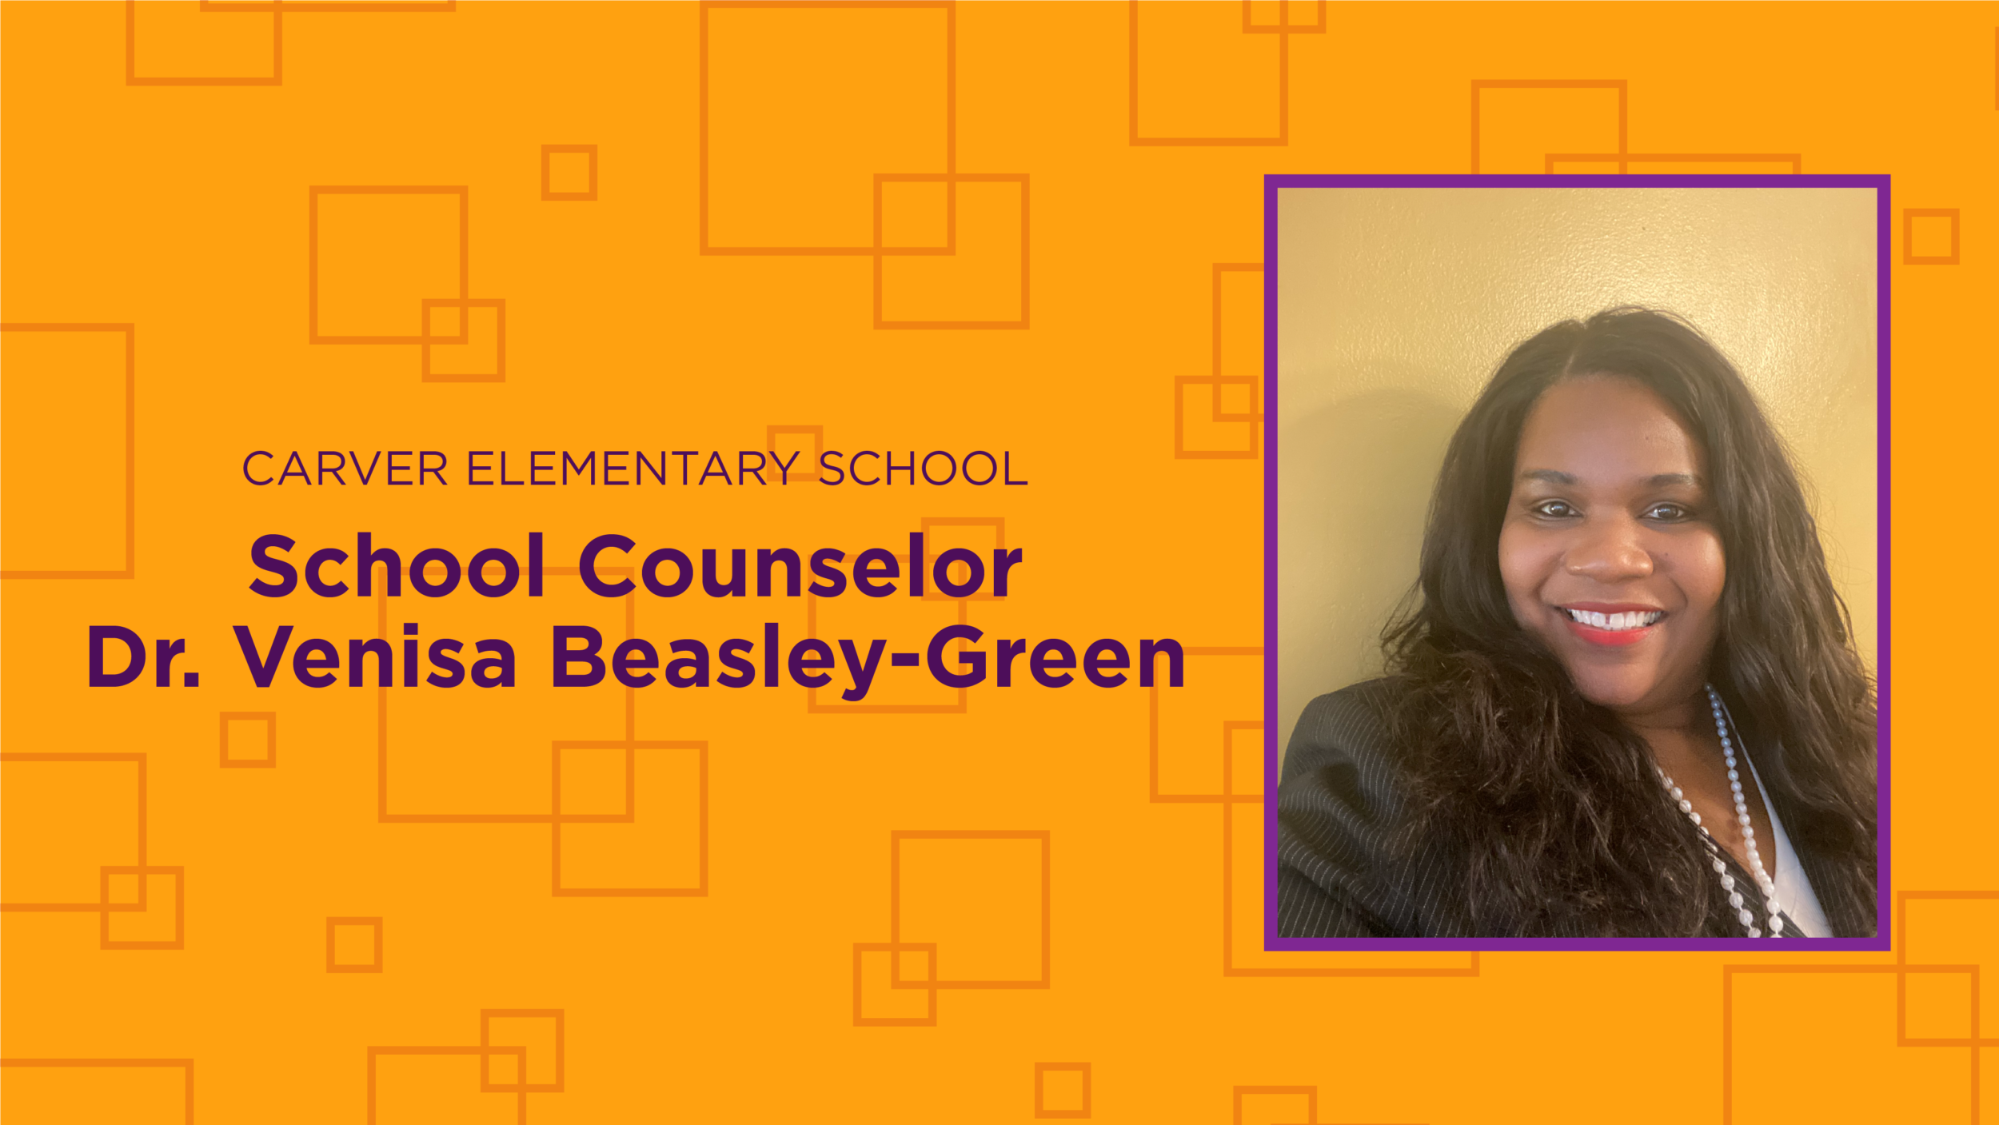 Image of School Counselor Dr. Venisa Beasley-Green